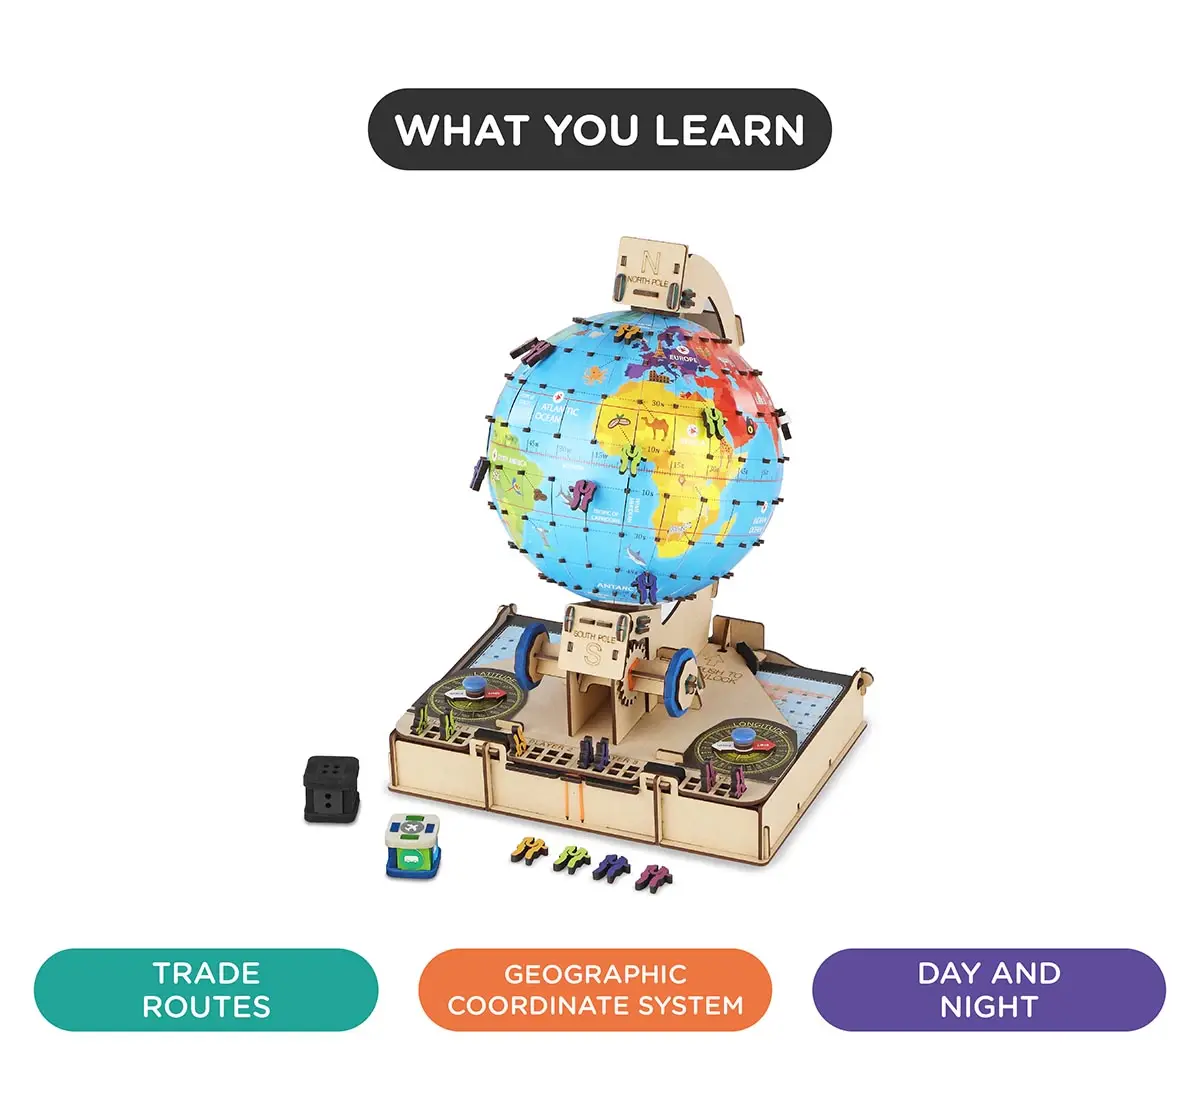 Smartivity Labs GLOBE Trotters Augmented Reality STEM Educational DIY Construction Toy Kit Easy Instructions Experiment Play Learn Science Free App for Kids age 7Y+